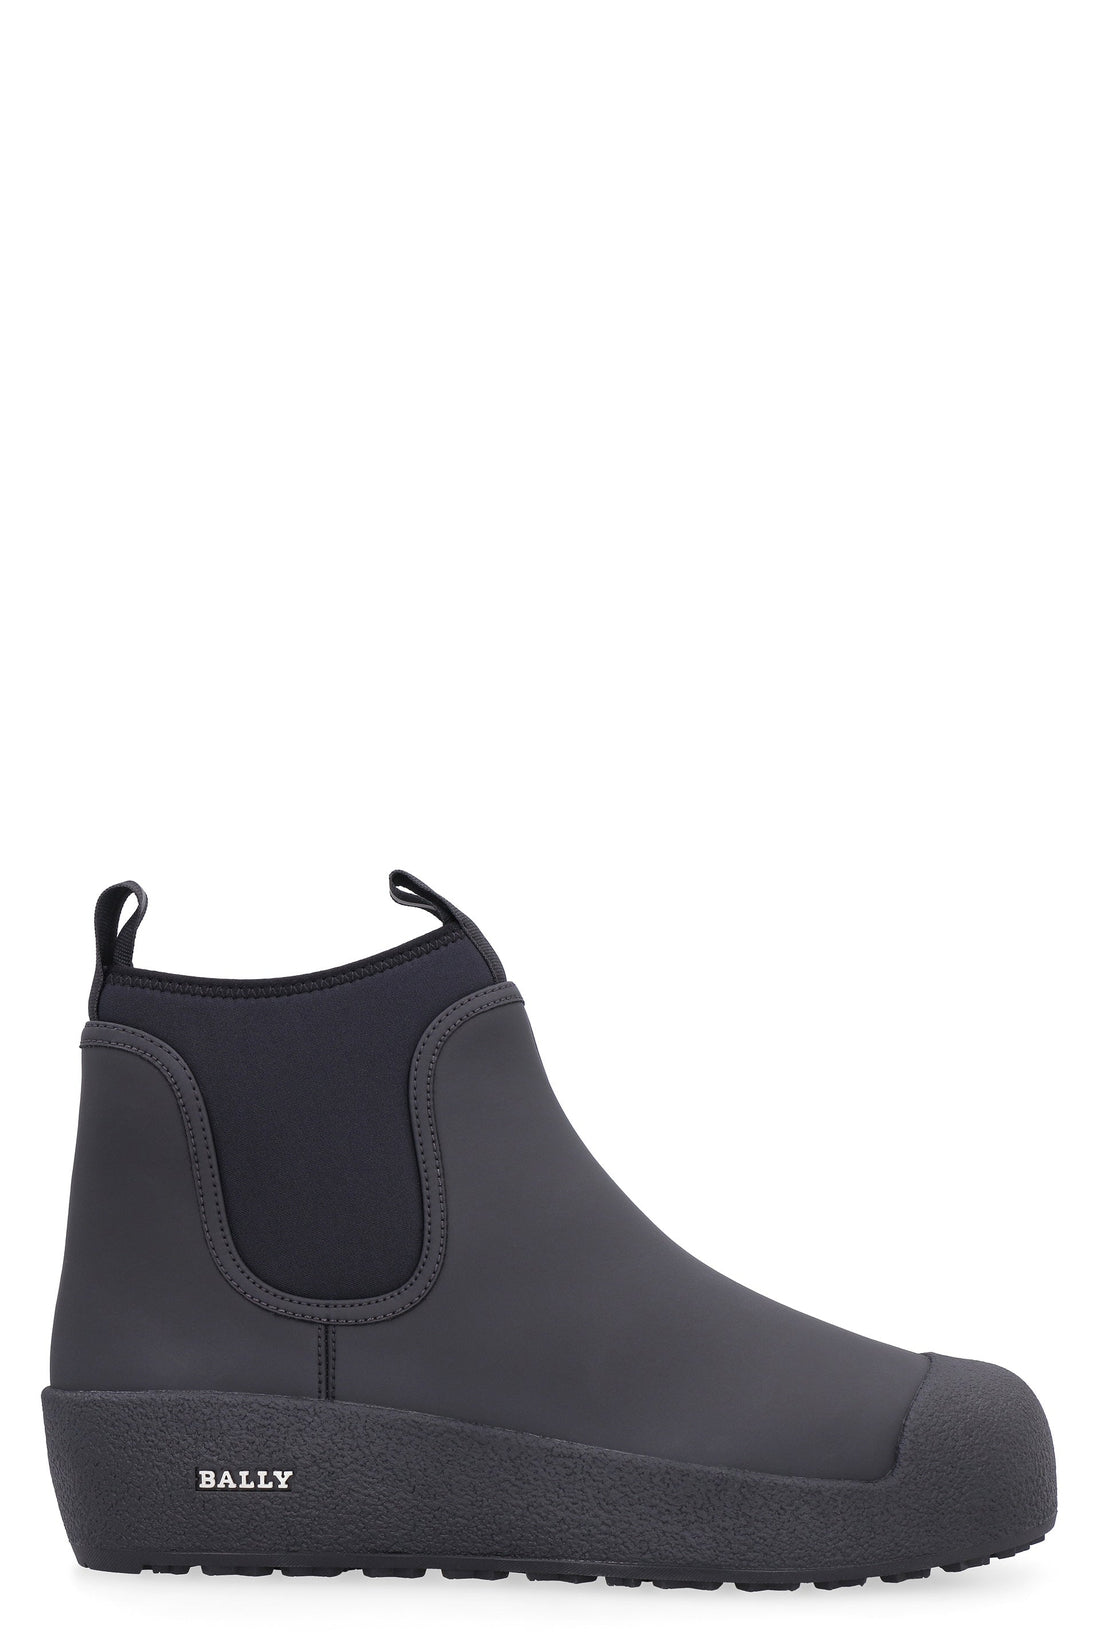 Bally-OUTLET-SALE-Gadey leather ankle boots-ARCHIVIST